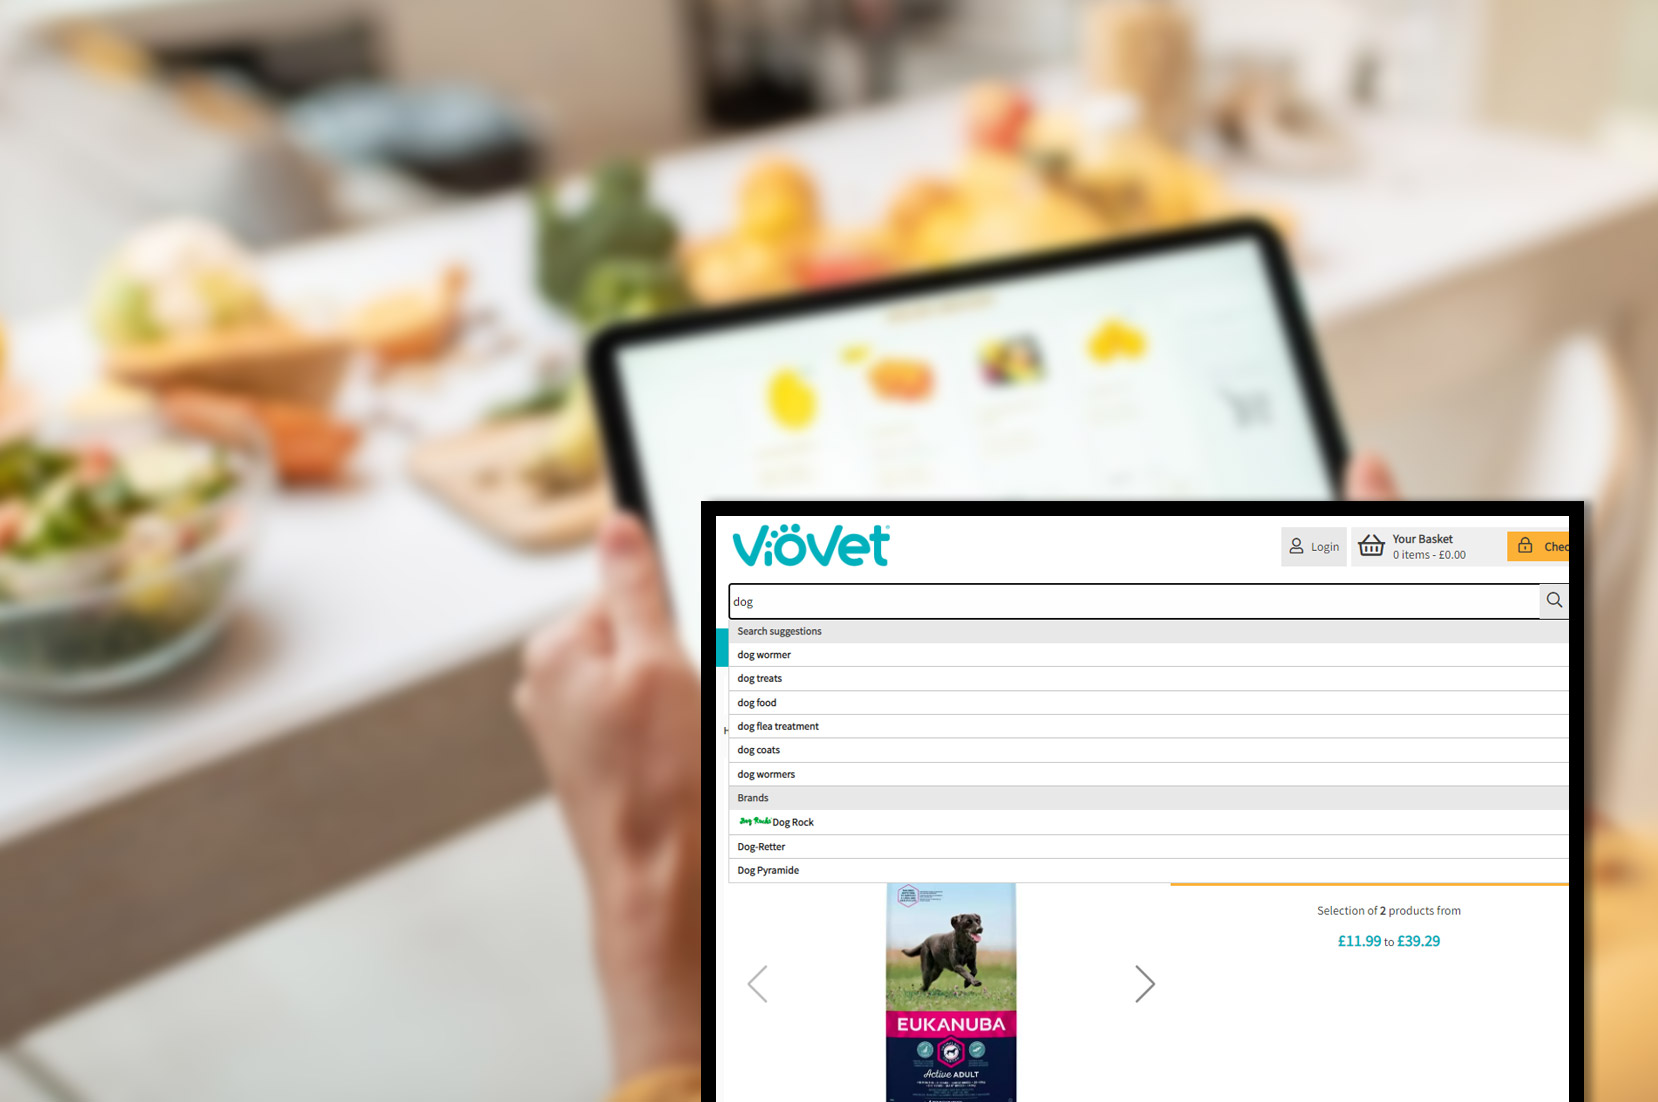 viovet-co-ukproduct-categories-keywords-and-brand-scraping-services